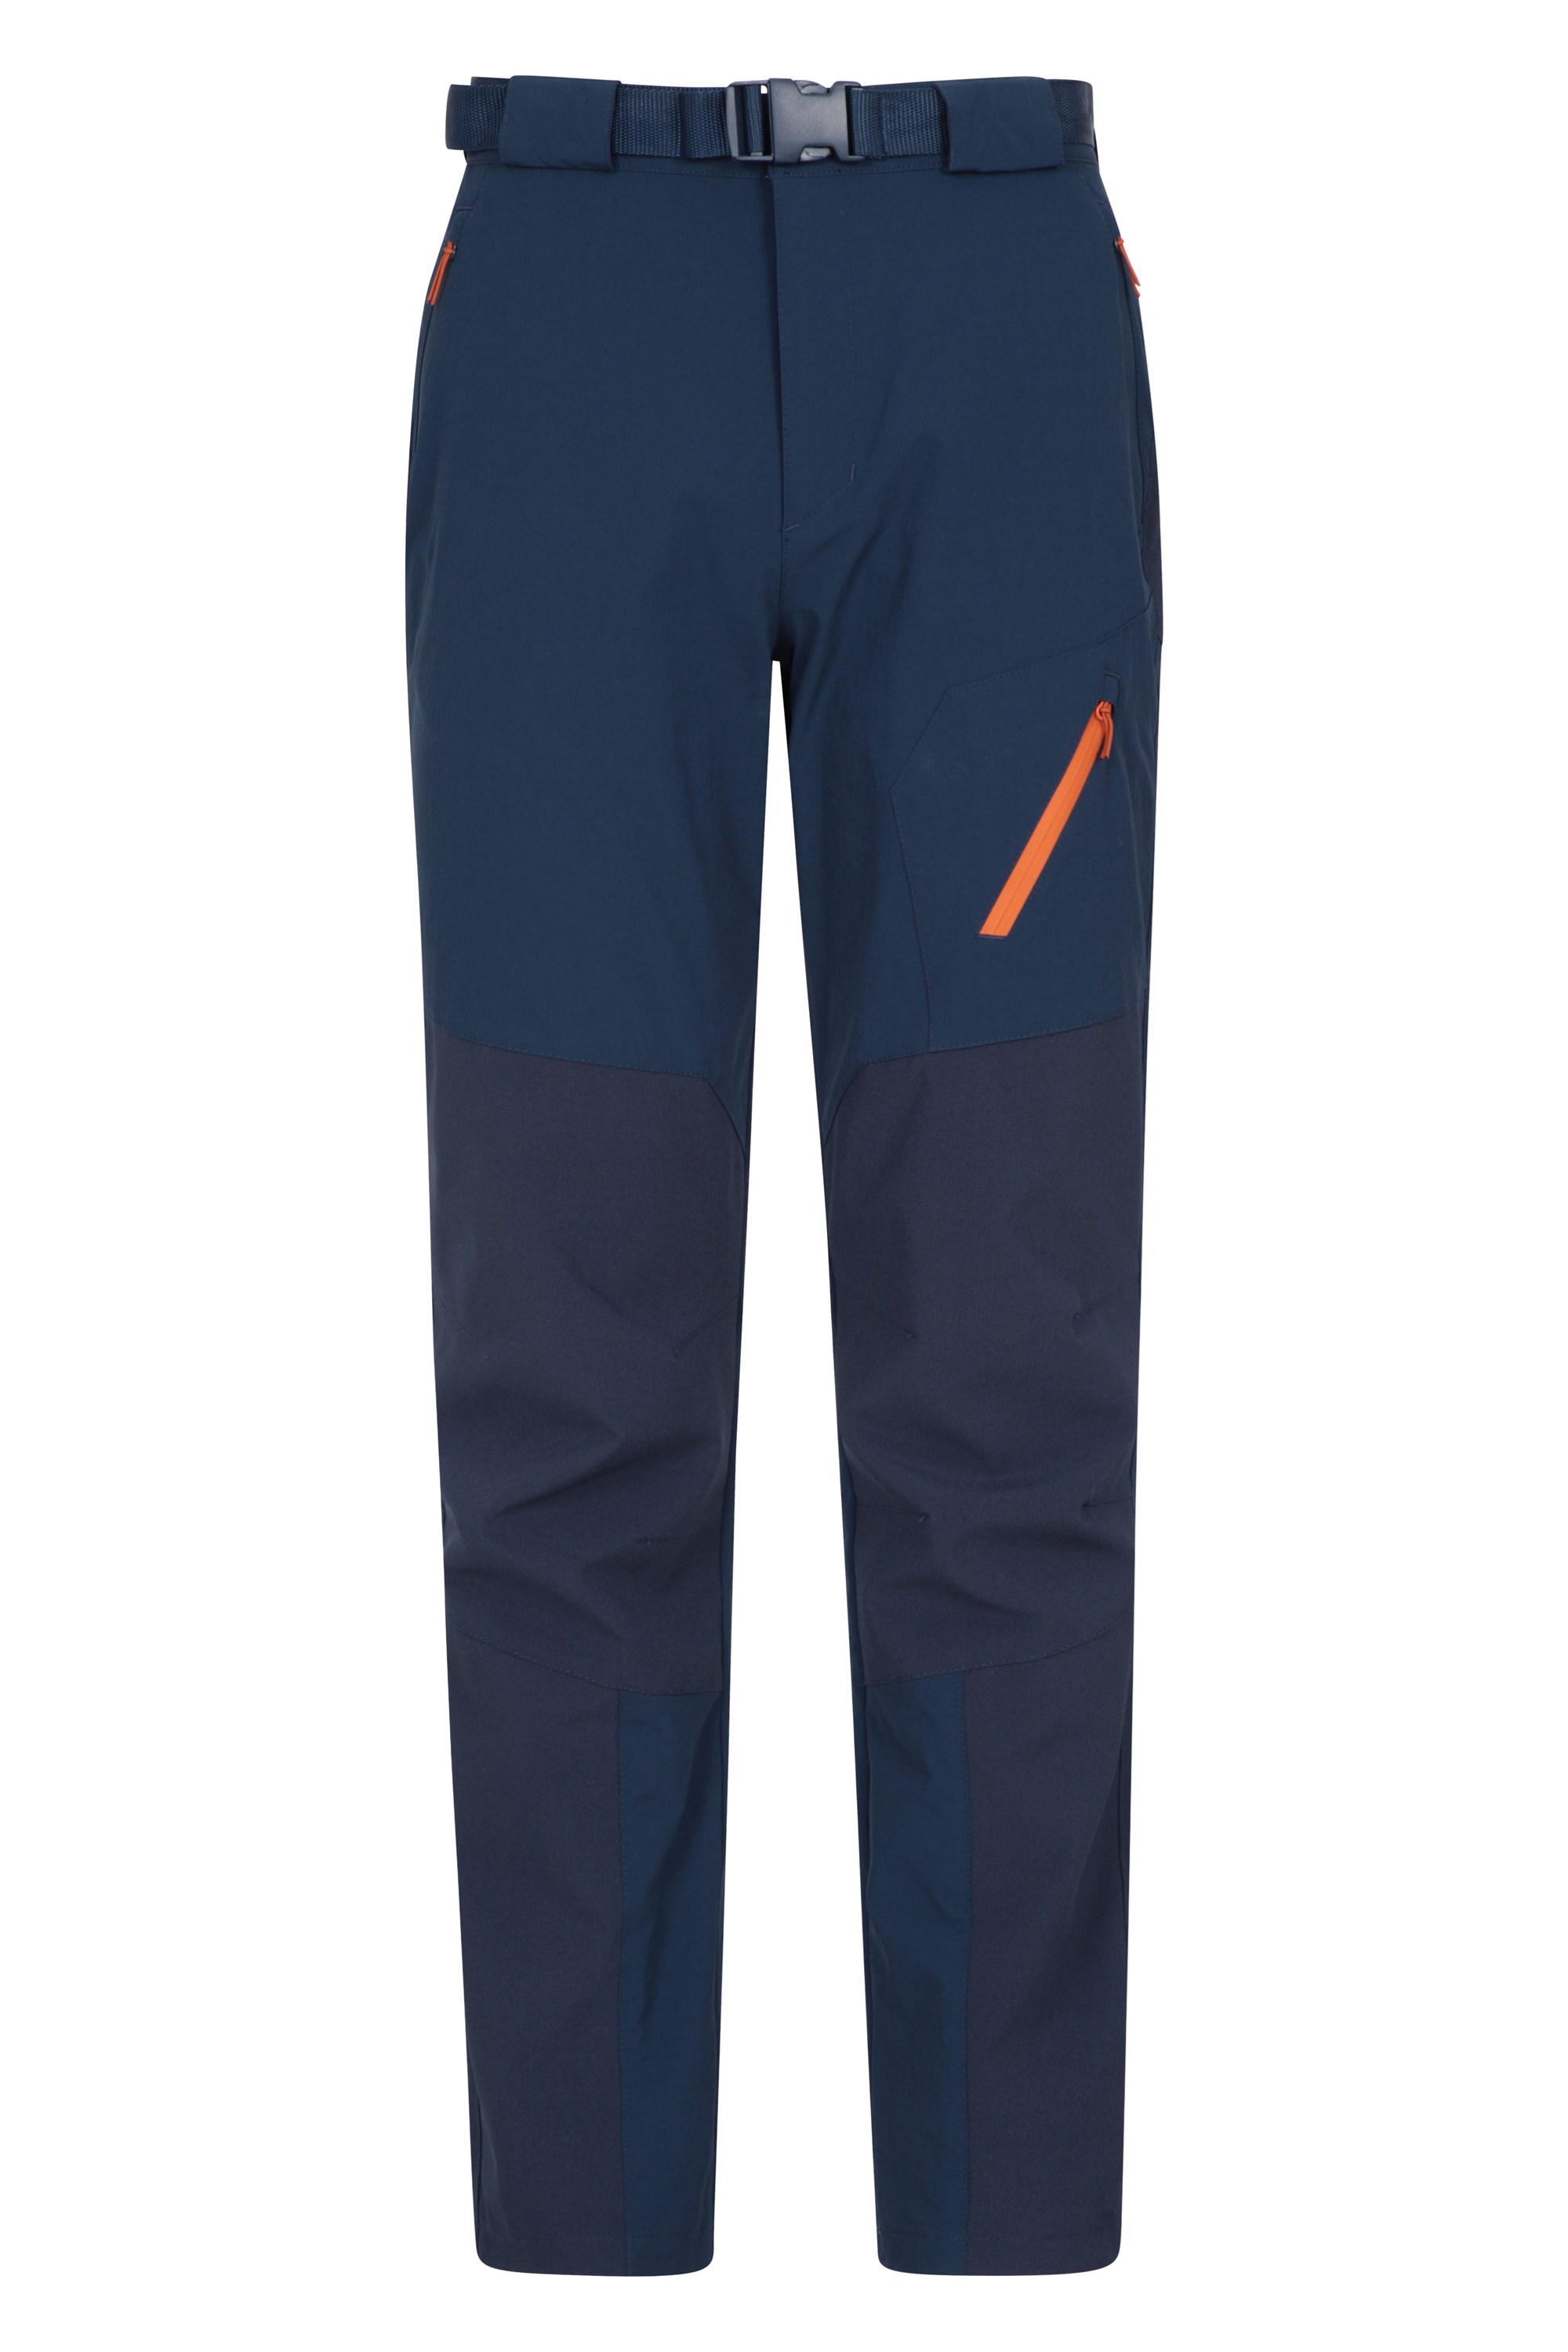 Forest Mens Water-Resistant Trekking Trousers - Navy